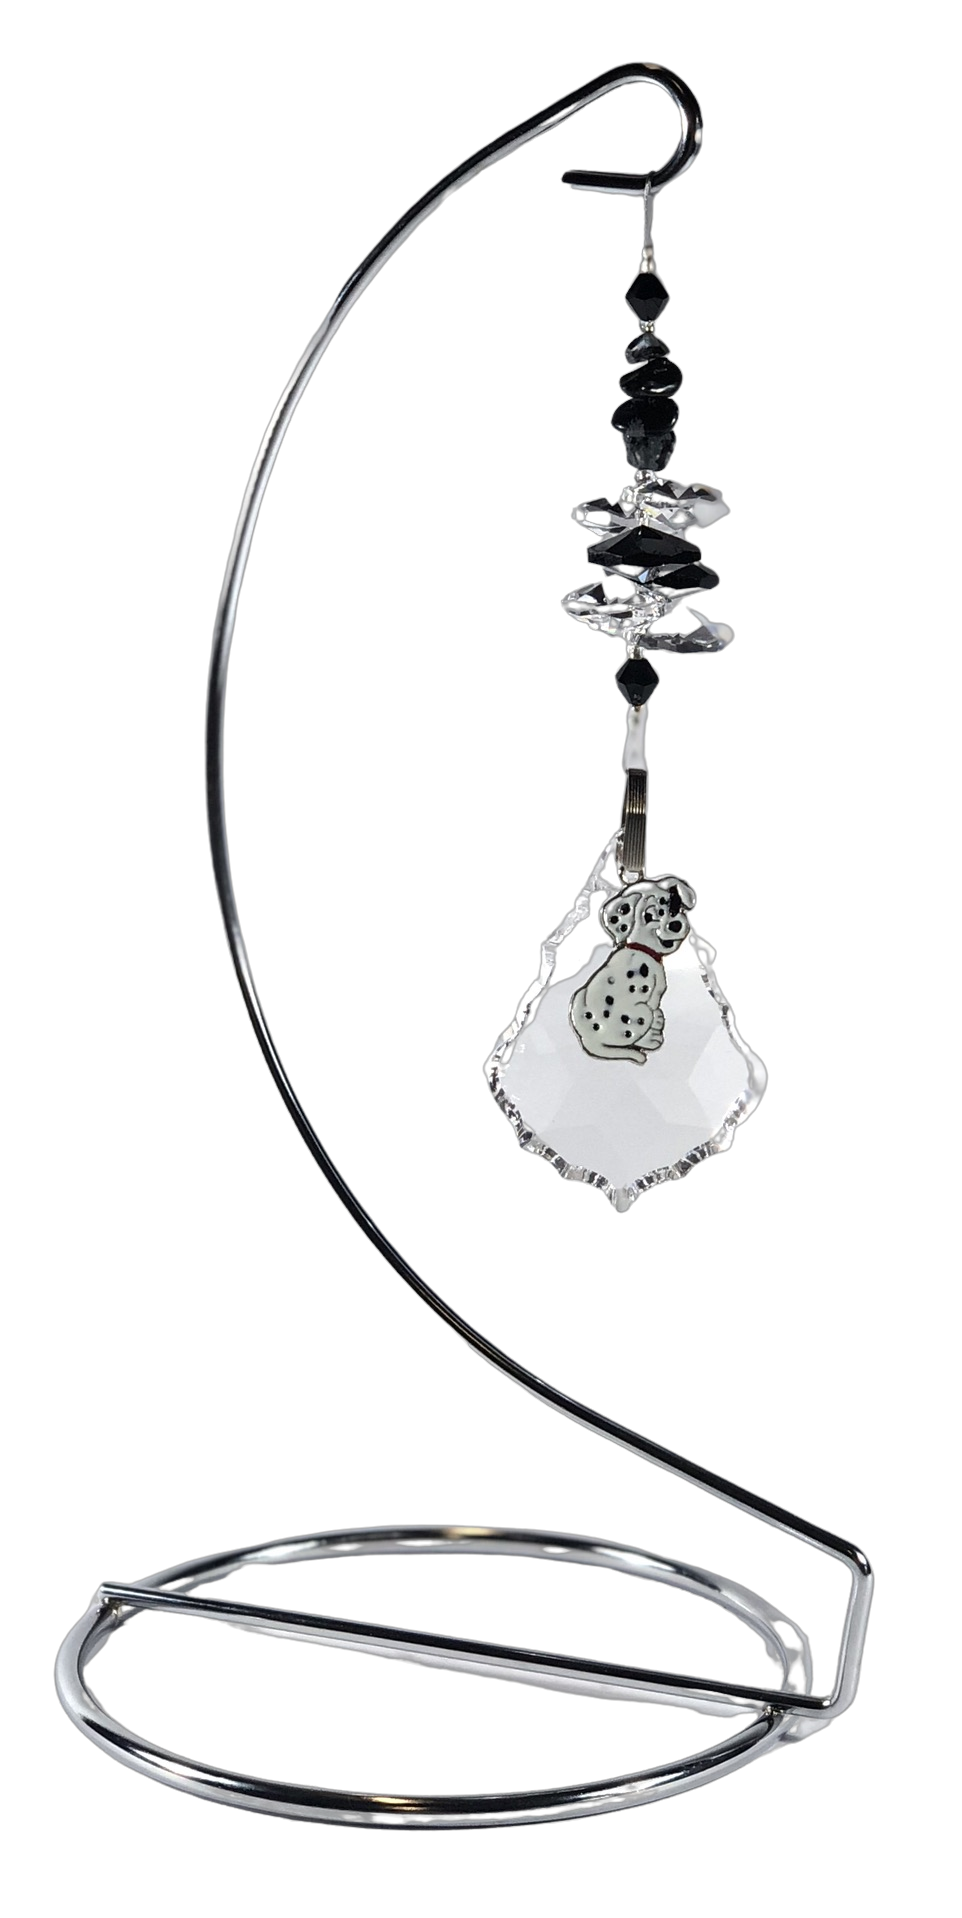 101 Dalmatians - Disney crystal suncatcher is decorated with snowflake obsidian gemstones and come on this amazing stand.